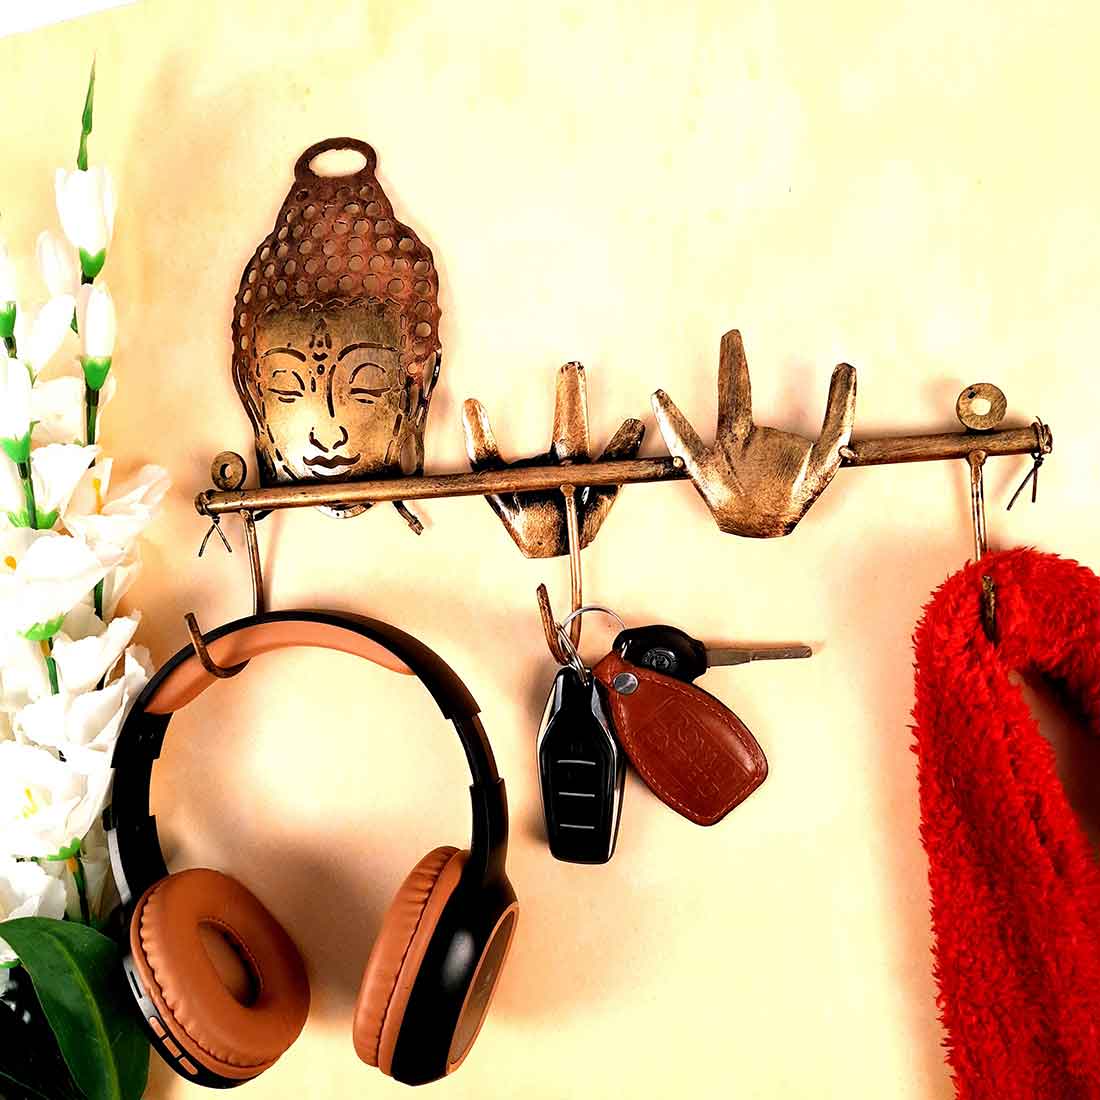 Key Holder Wall Hanger | Key Hanging Organizer Stand - Buddha Design | Key Hook Hanging Wall Mount - For Home, Entrance, Office Decor & Gifts - 14 Inch (3 Hooks)